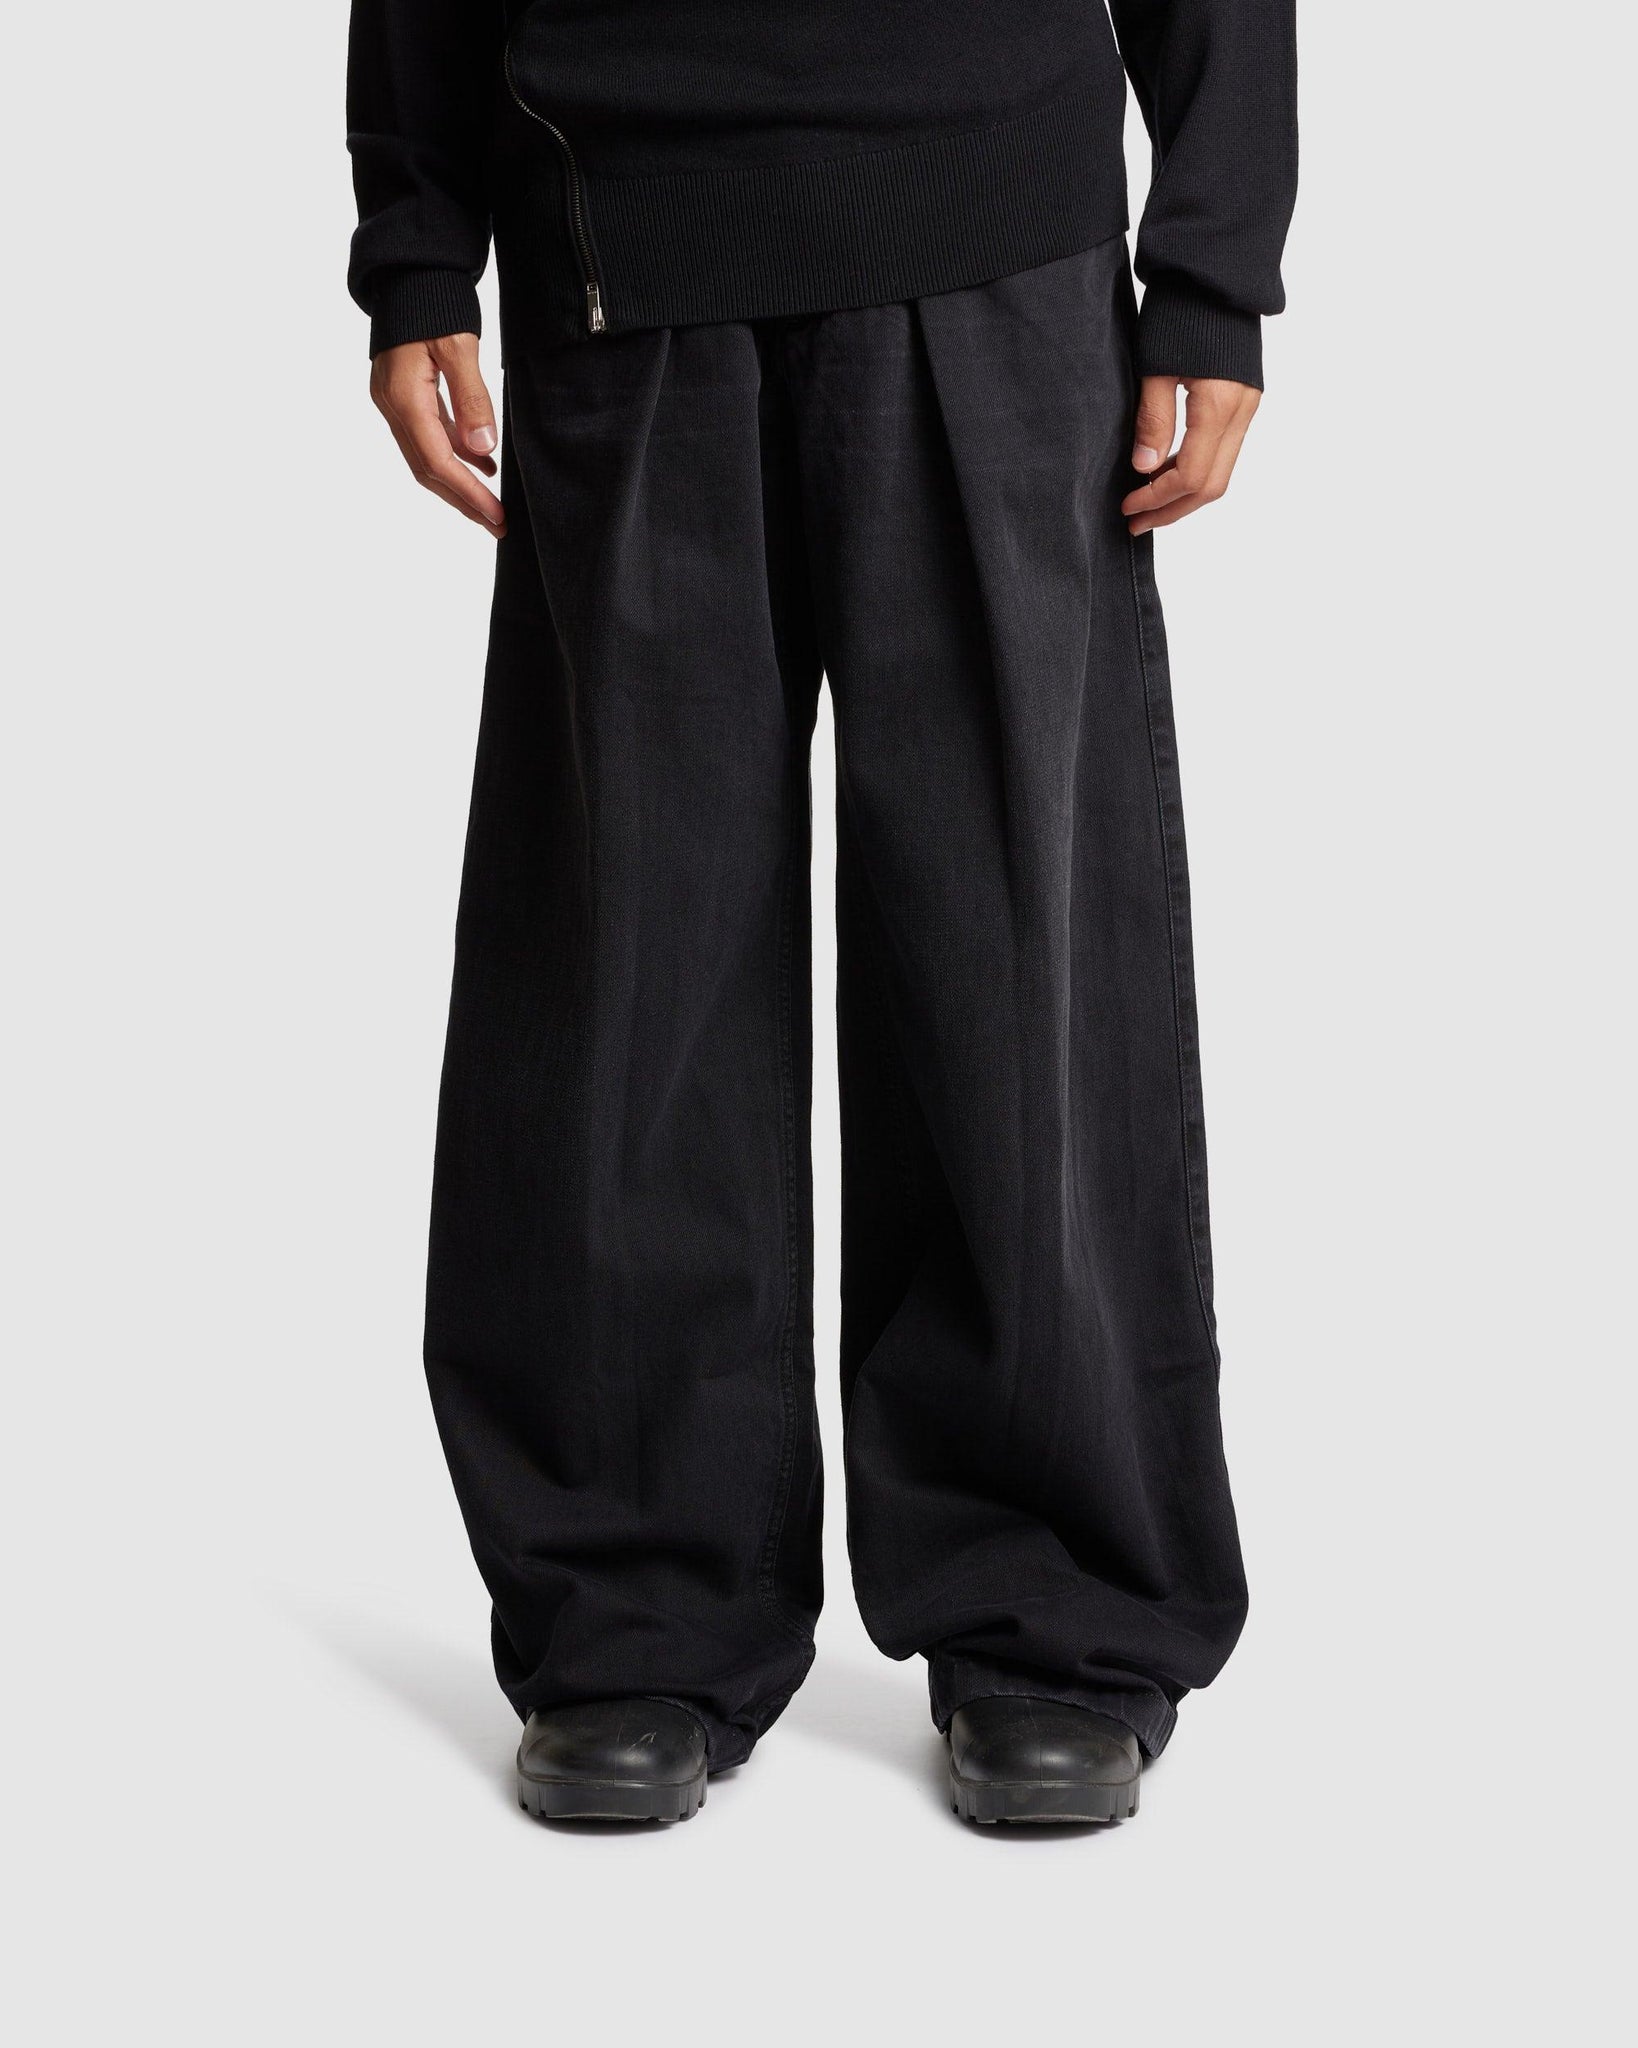 Janael Pants Black - {{ collection.title }} - Chinatown Country Club 